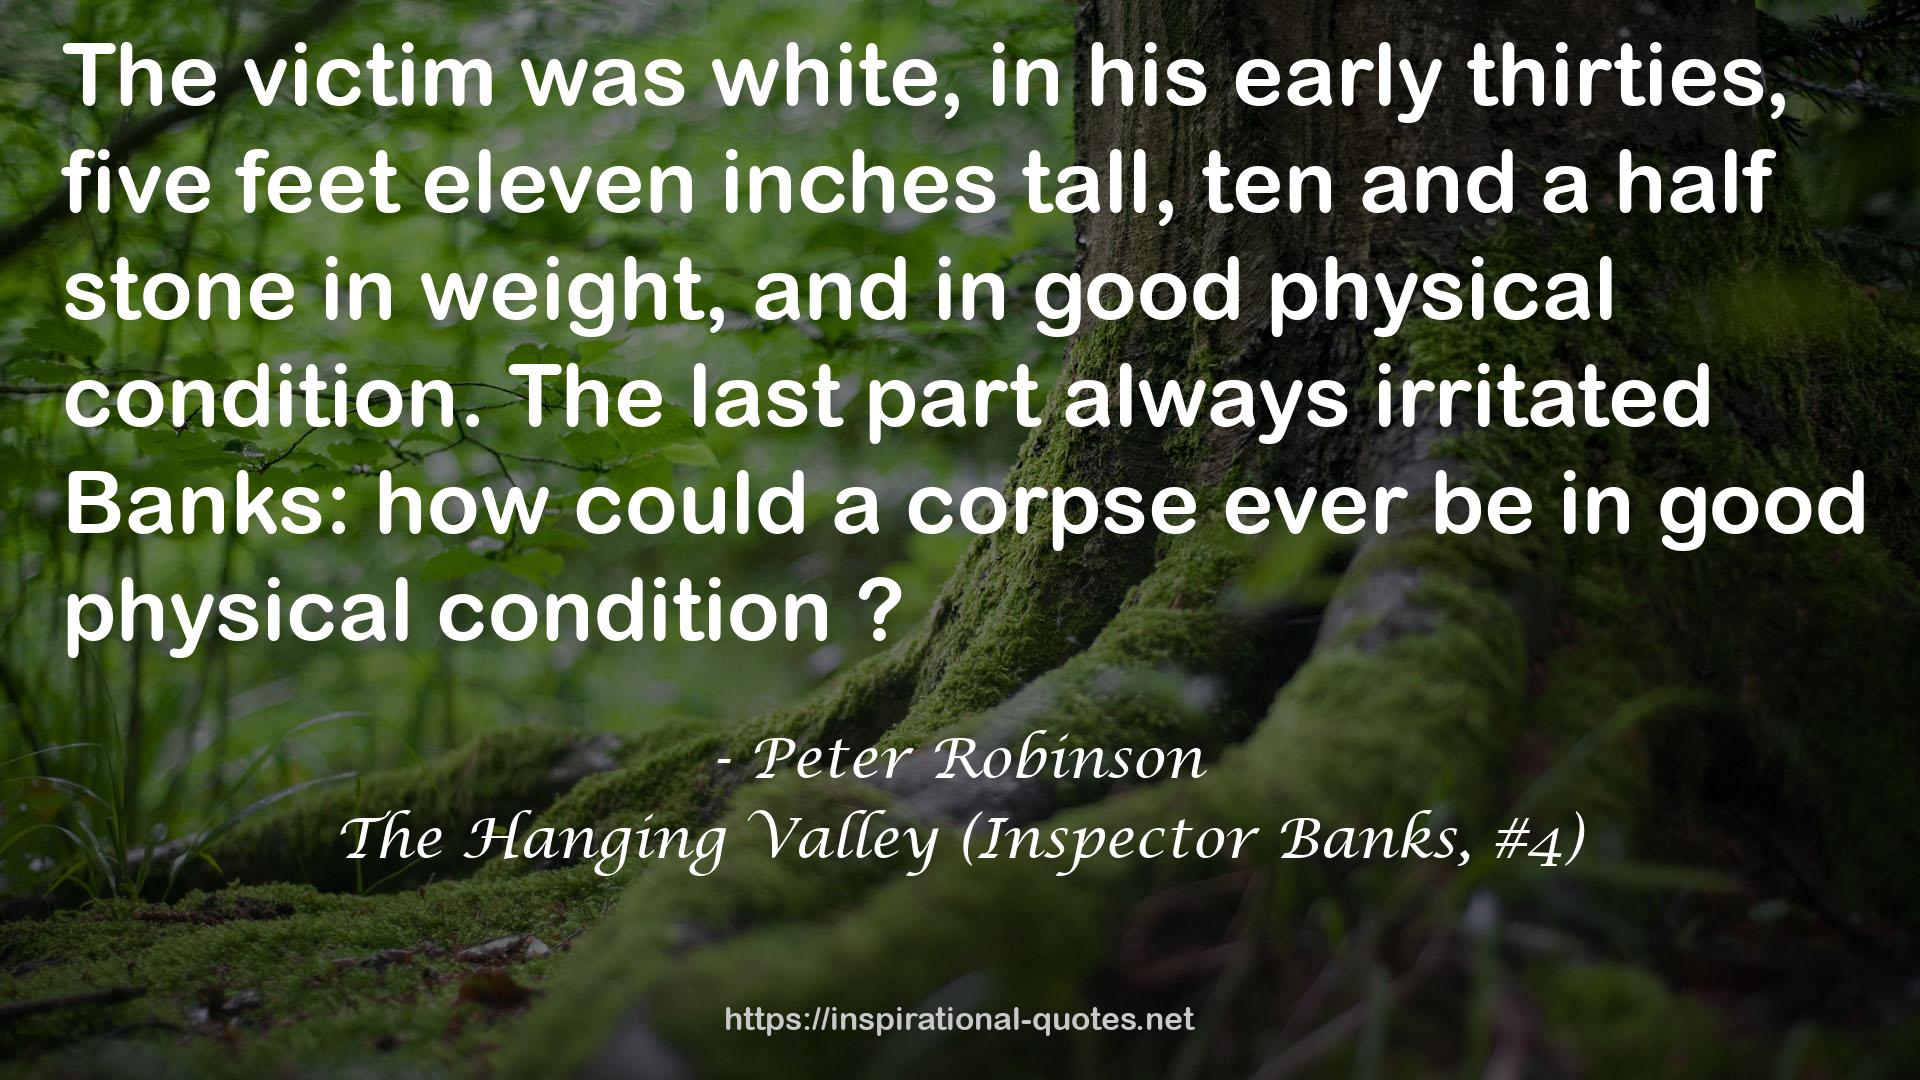 The Hanging Valley (Inspector Banks, #4) QUOTES